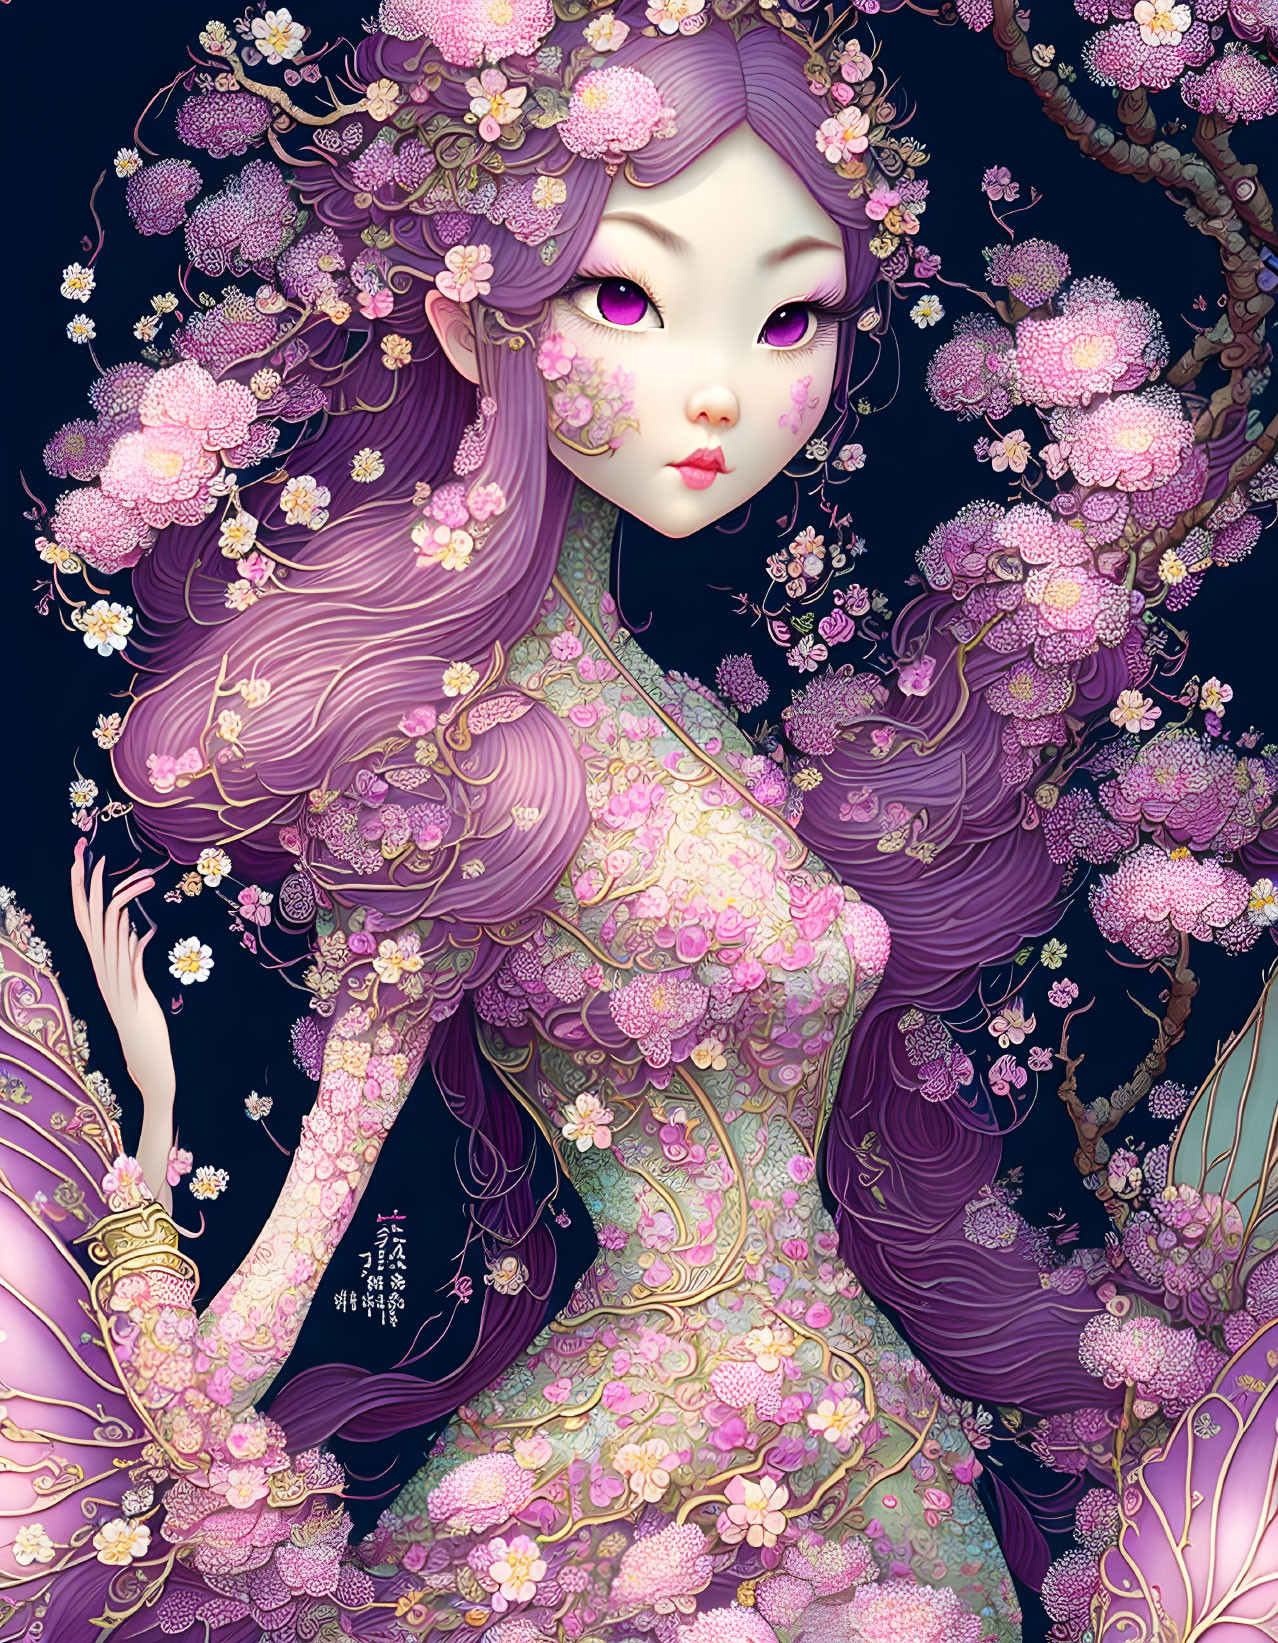 Illustrated female figure with purple hair in pink floral dress on dark background